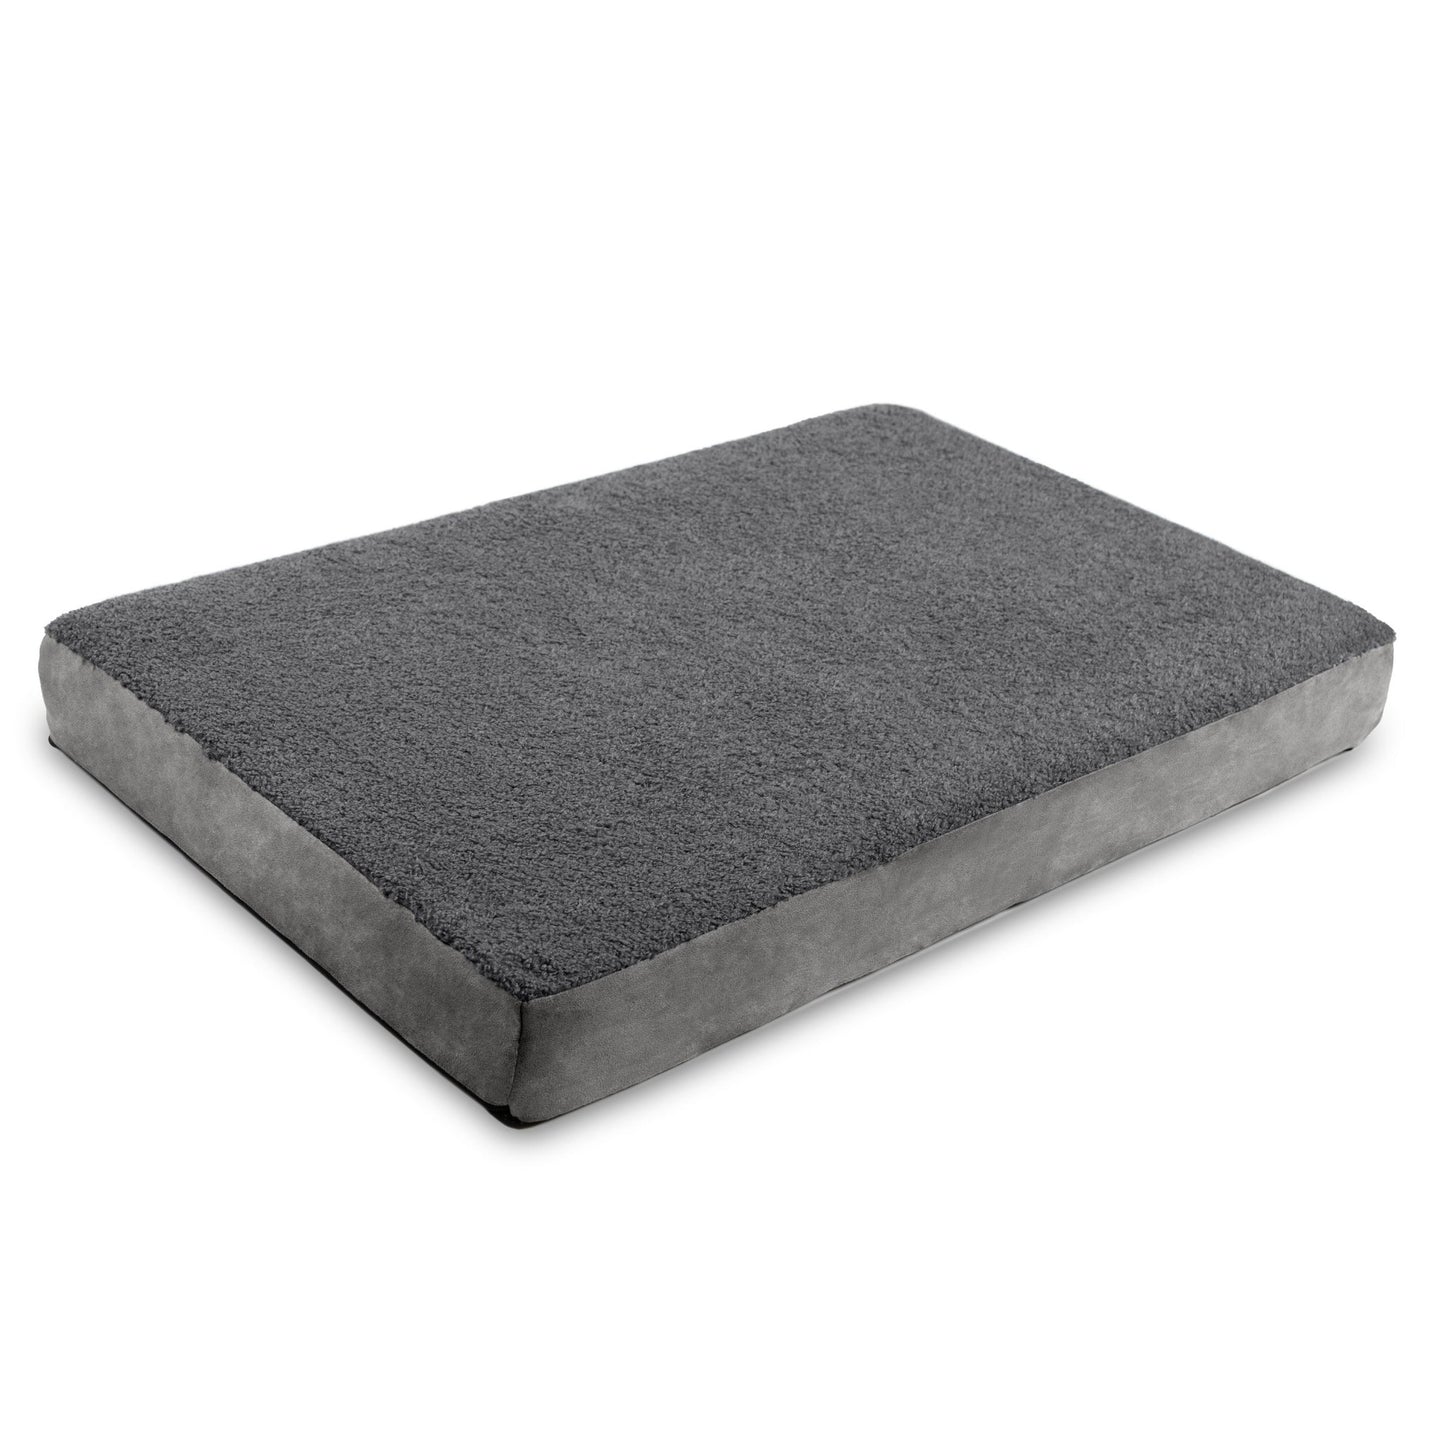 Jaxx Cubbi Dog Bed - Plush Boucle Sherpa Top for Cozy Comfort, Supportive Memory Foam for Joint Pain Relief, No - Slip Base for Stability, Machine Washable Cover and Waterproof Liner, Medium (19751) - SchoolOutlet